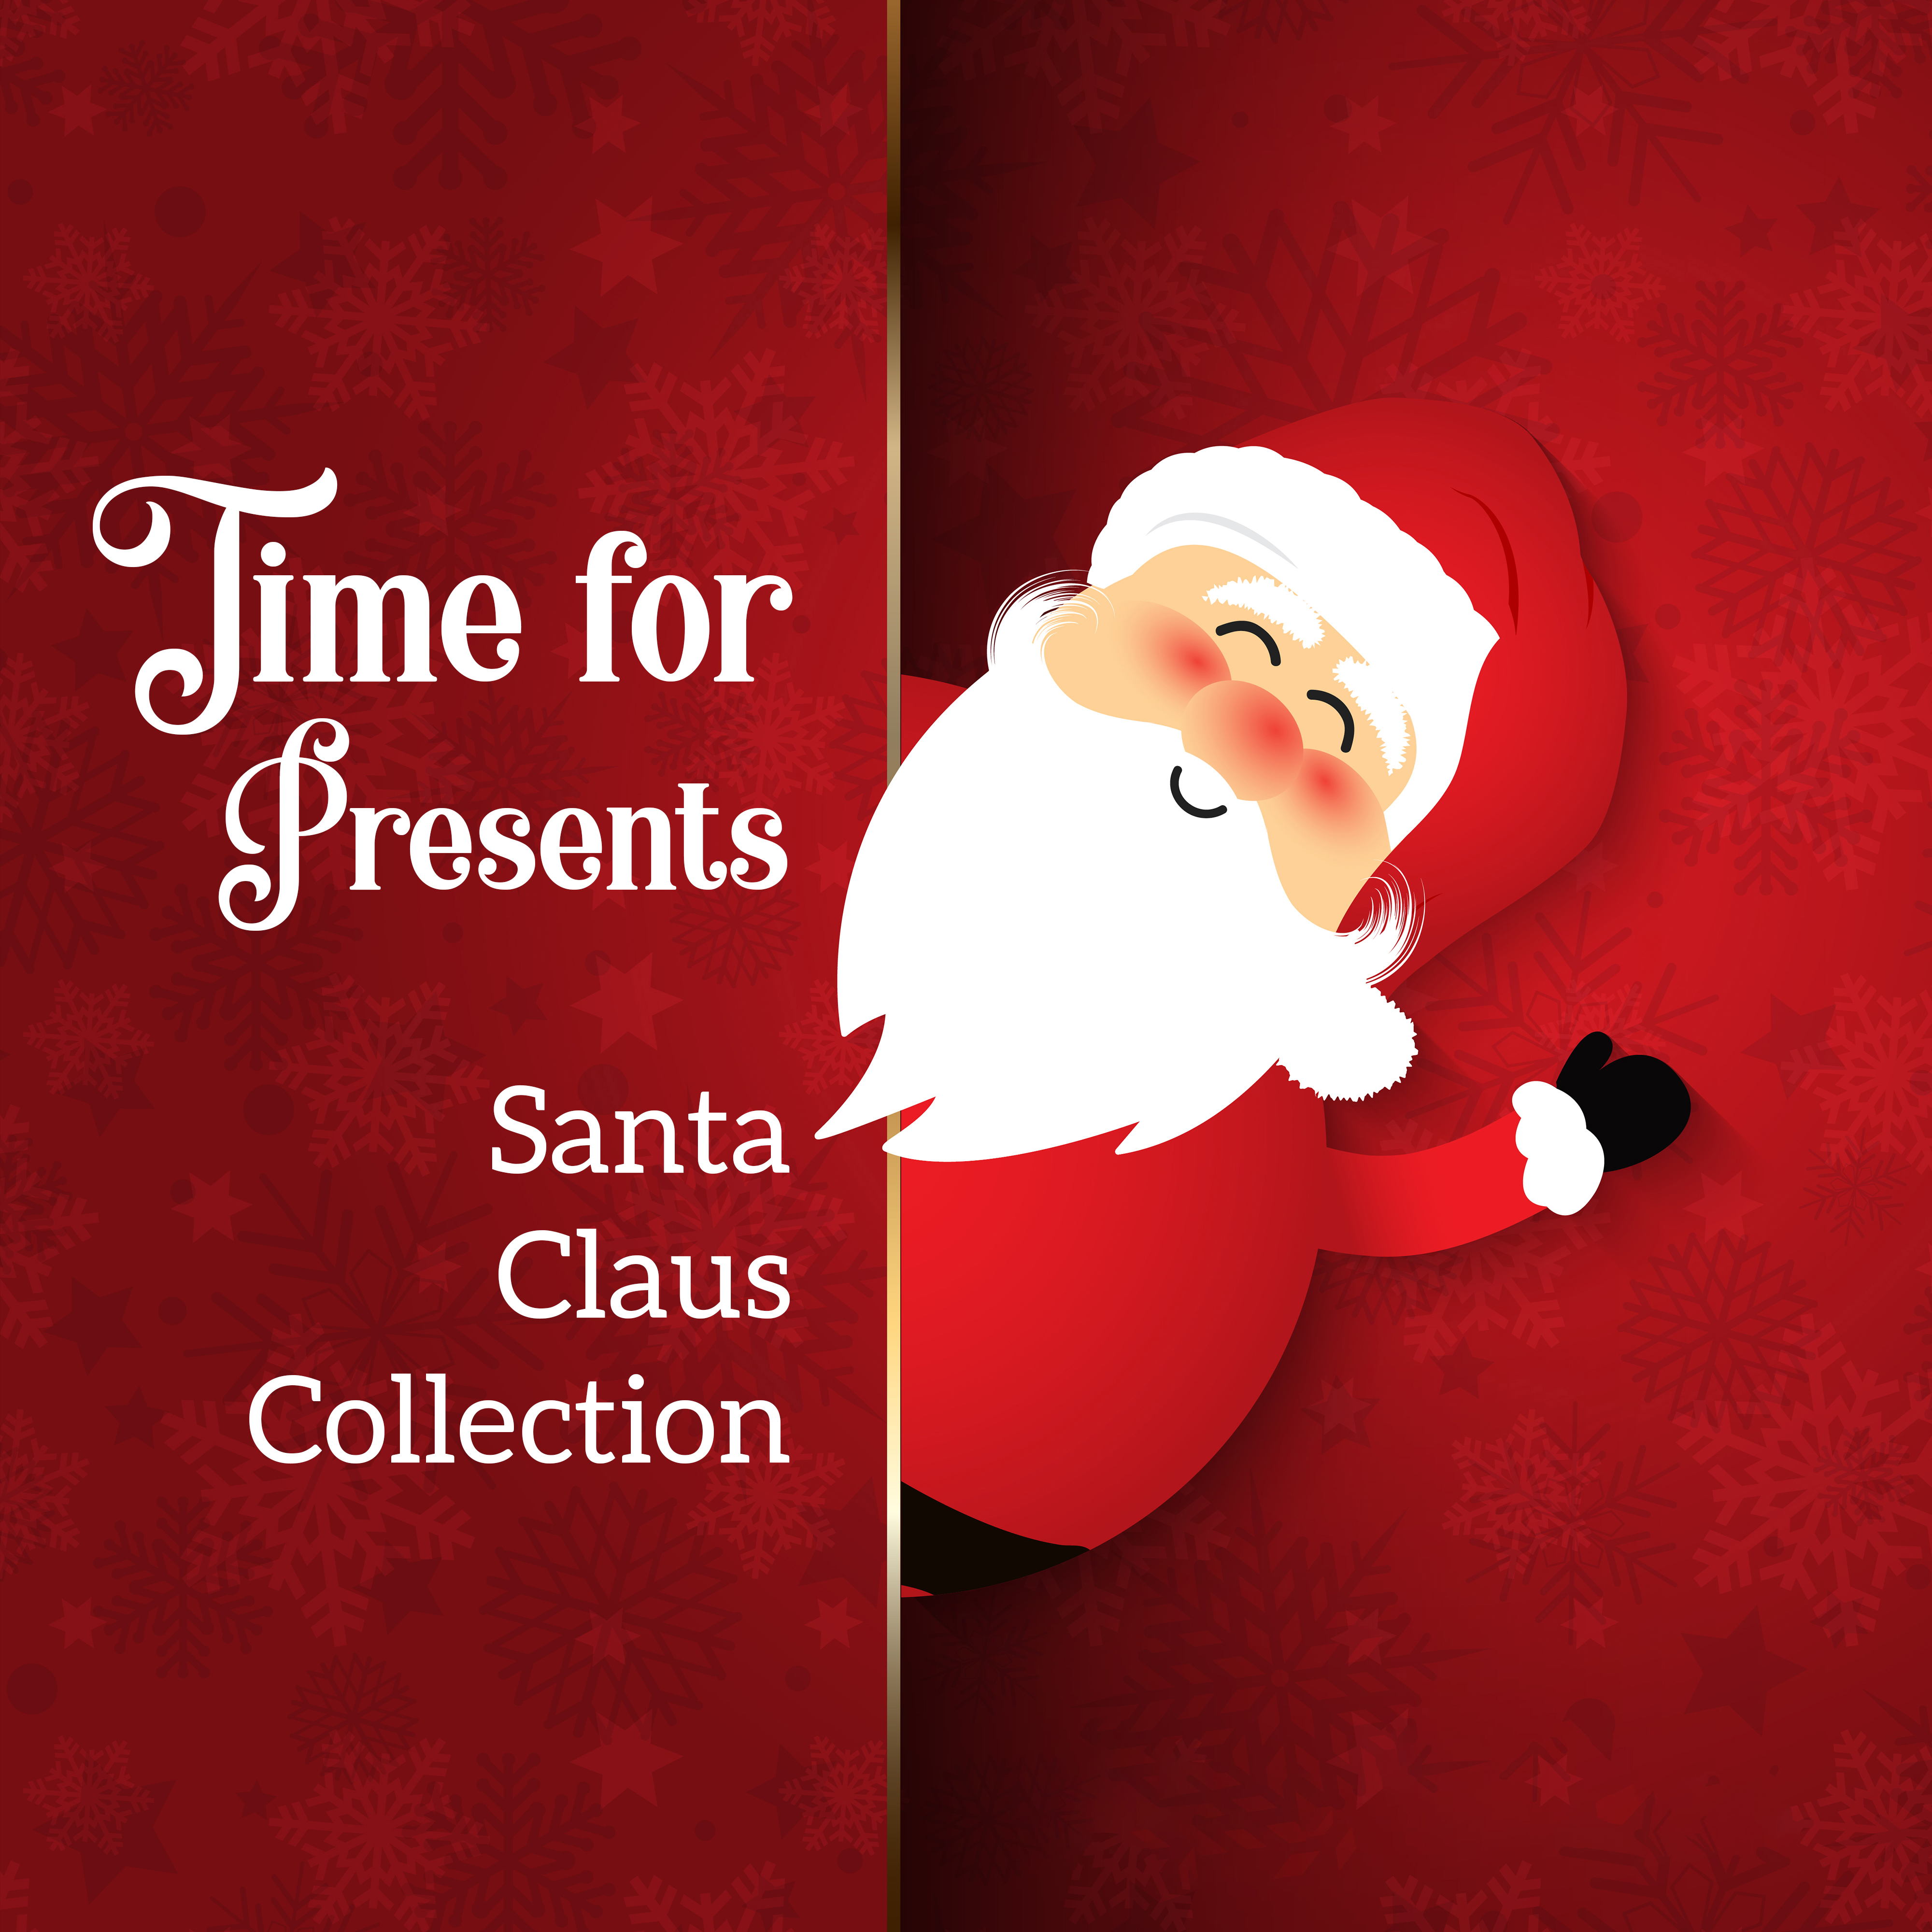 Time for Presents: Santa Claus Collection